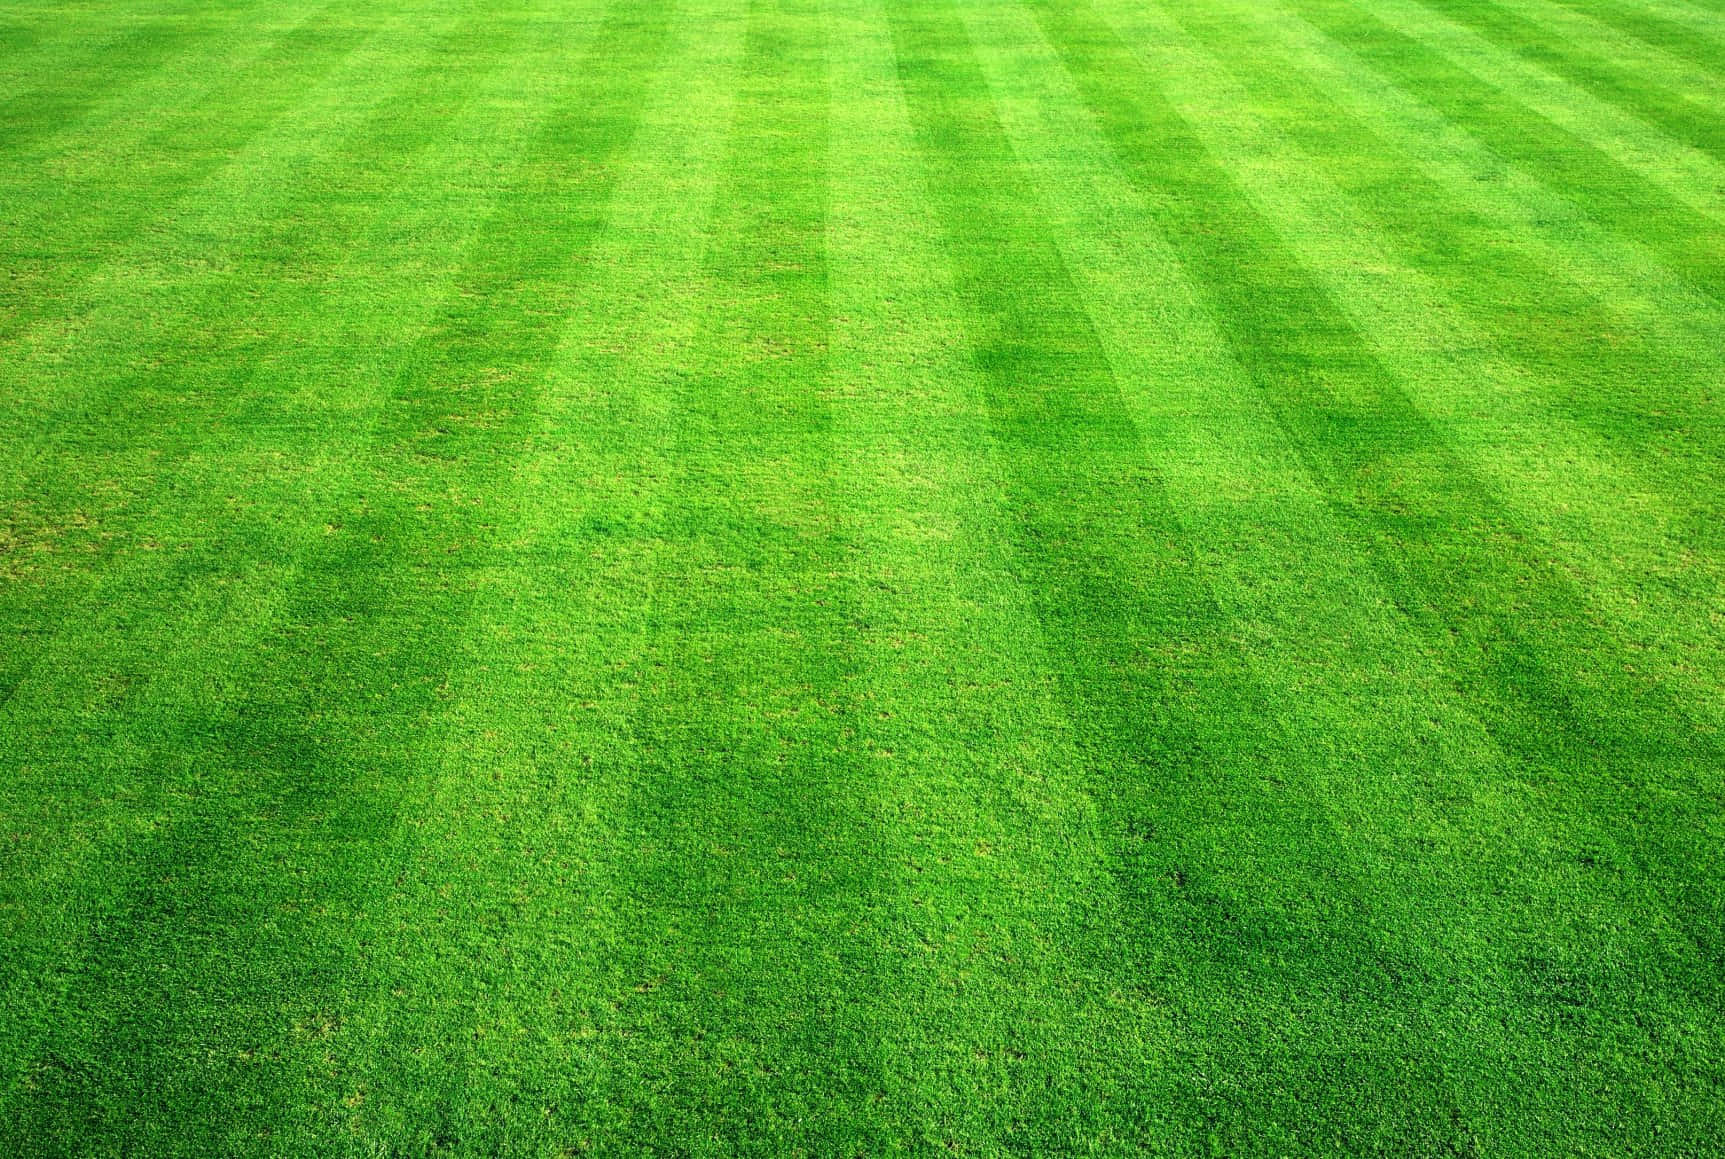 A Green Grass Field With A Striped Background